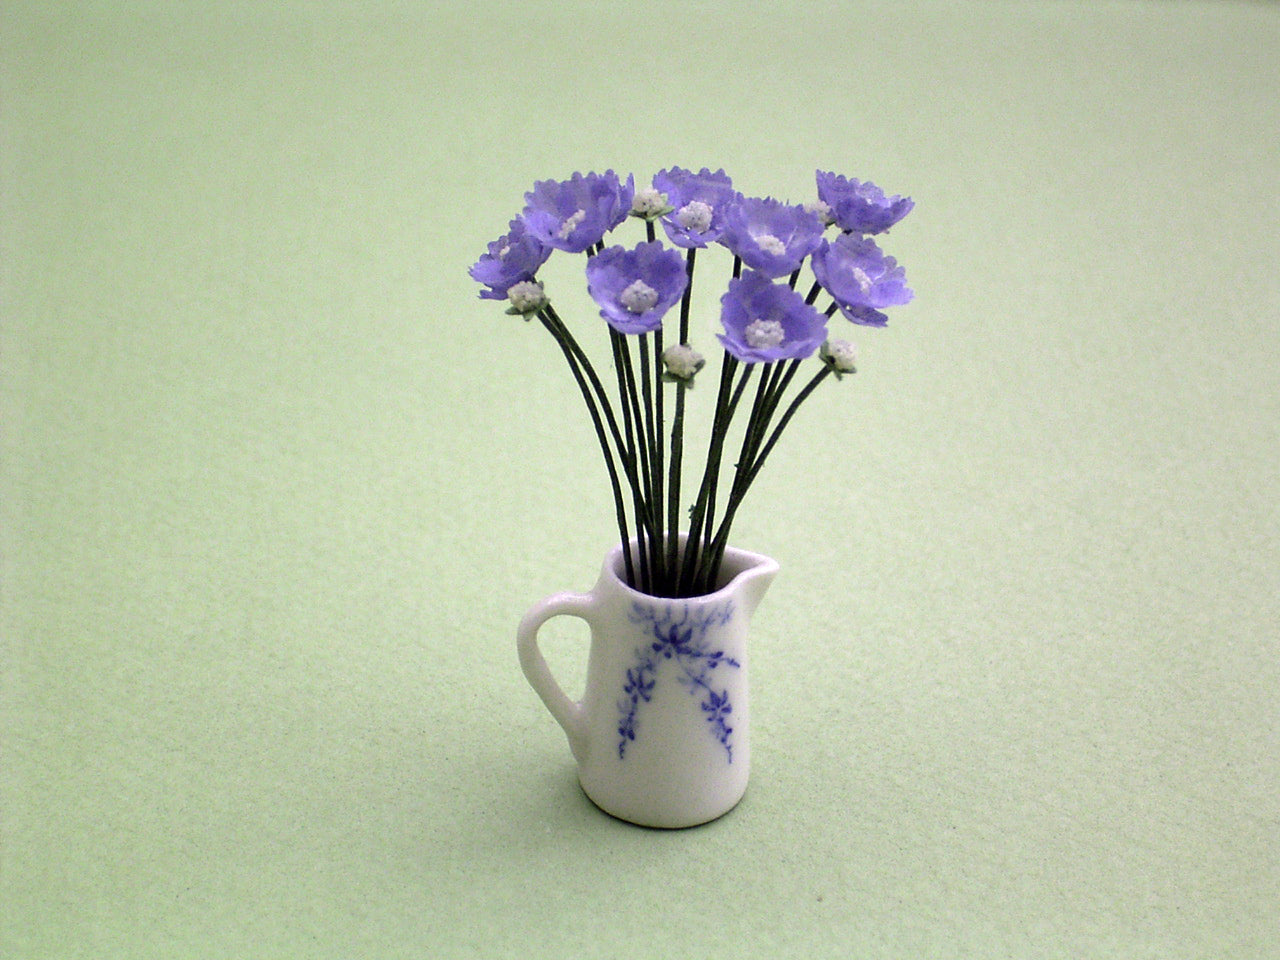 Scabious Flower Kit  for 1/12th scale Dollhouses, Florists and Miniature Gardens